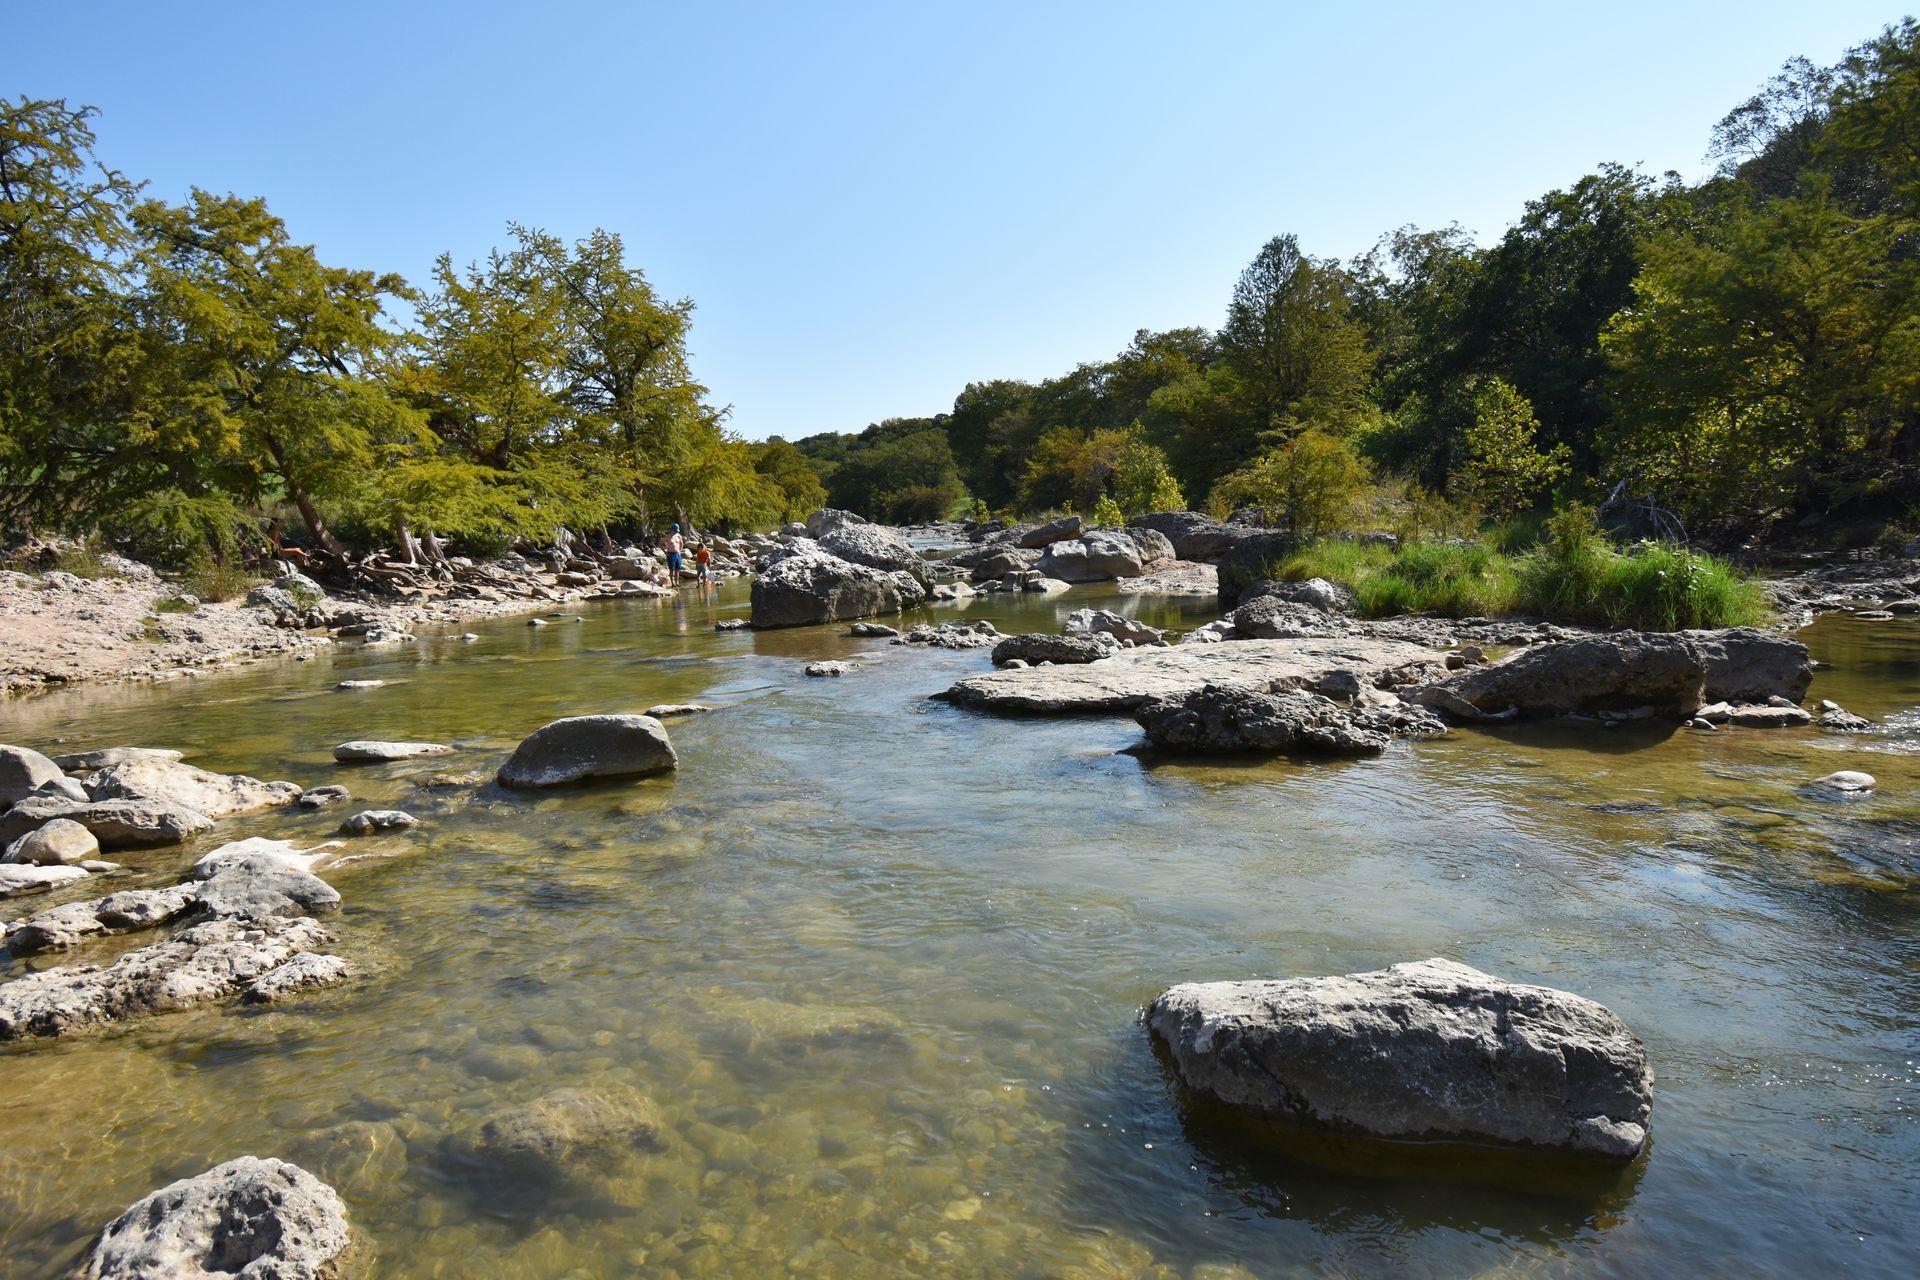 The swimming area at Pedernales Falls State Park